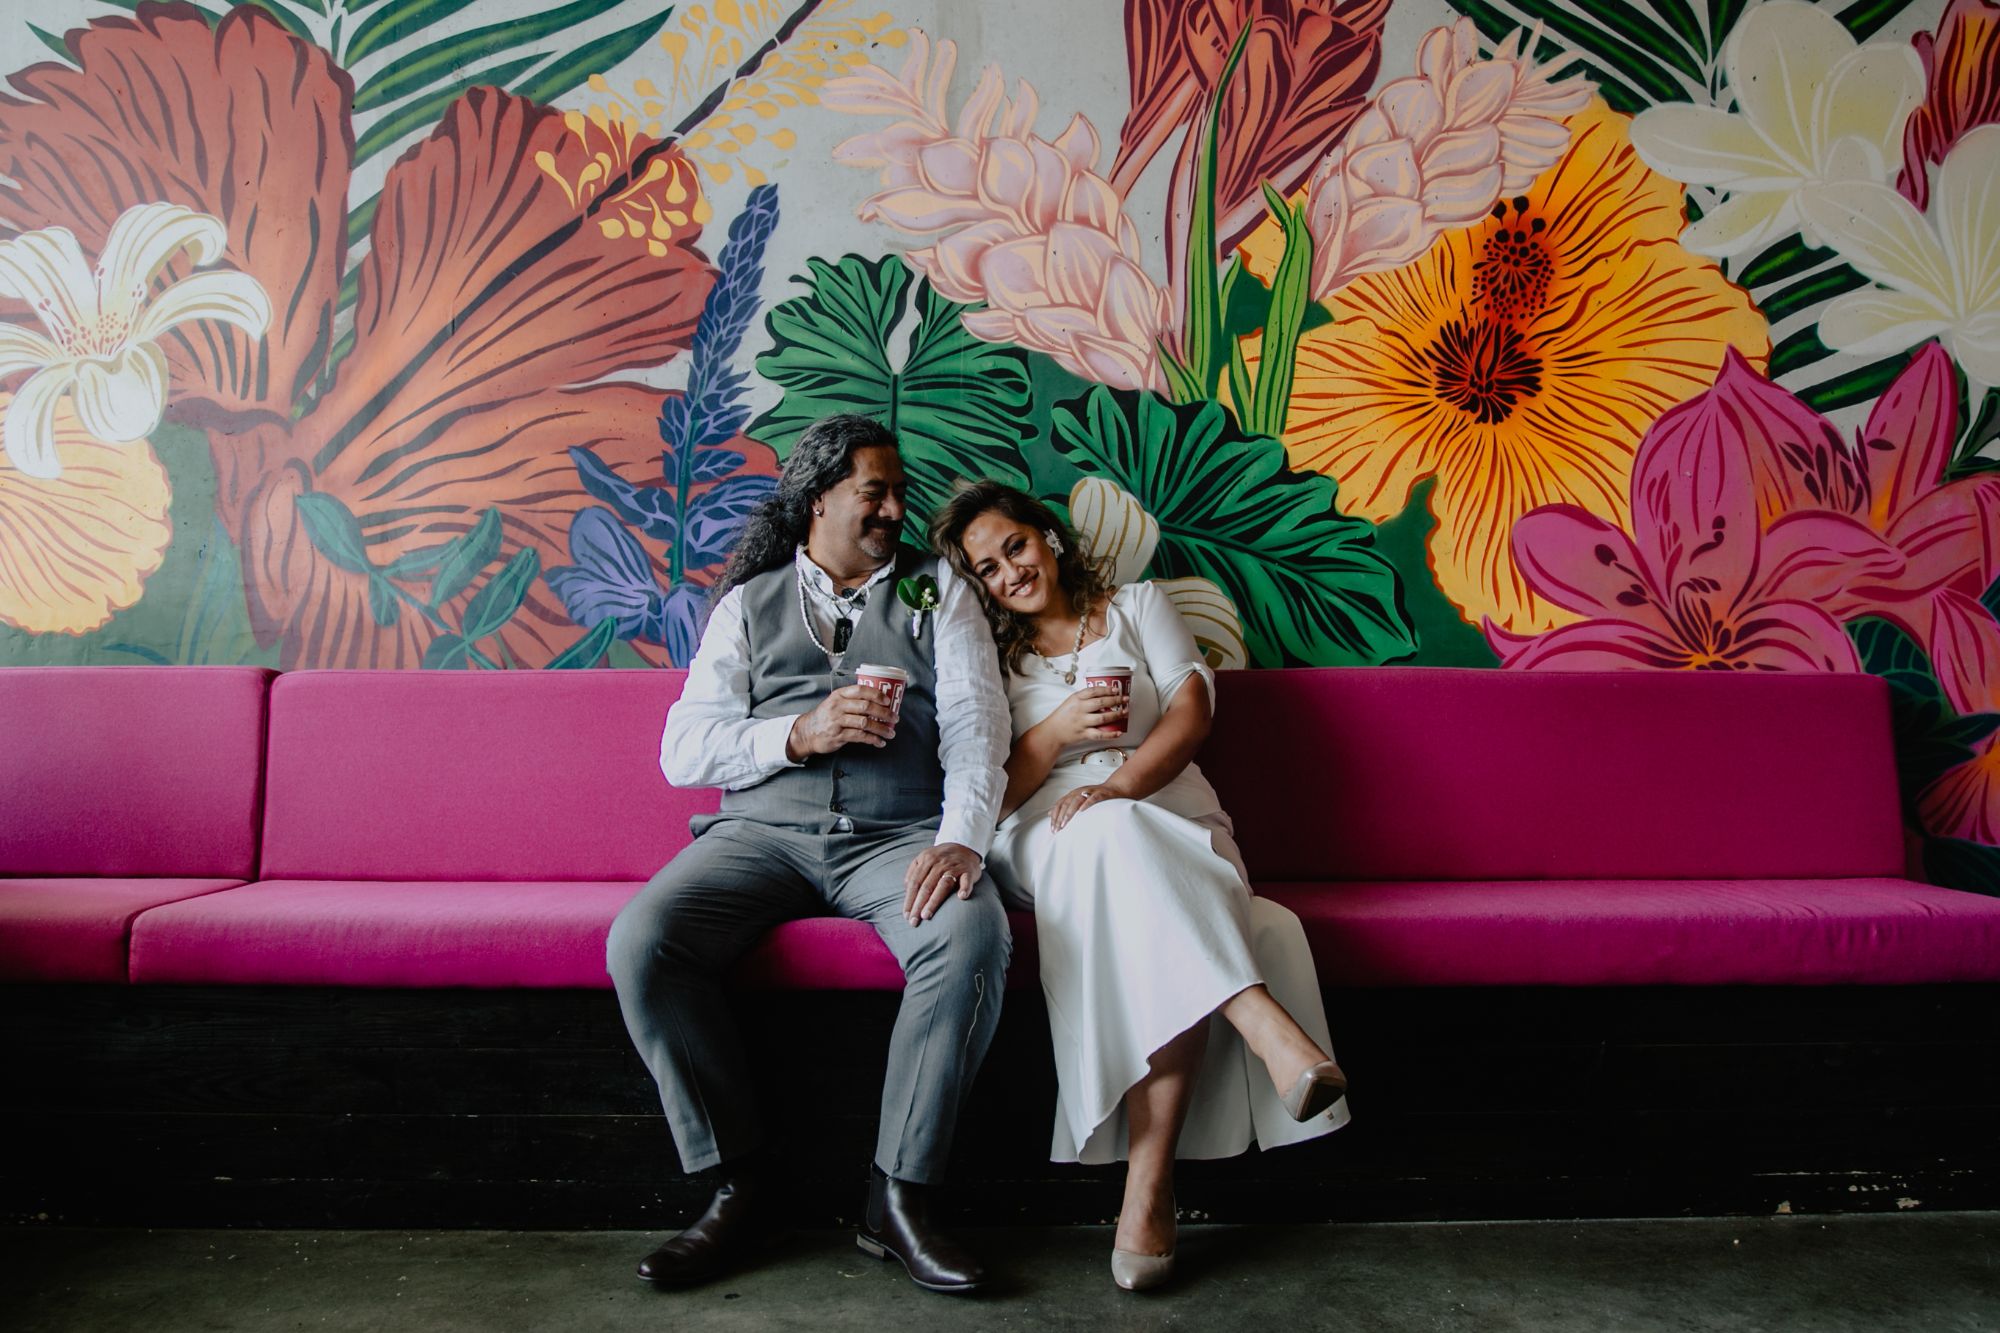 Newlywed bride and groom sitting on pink sofa with colorful floral painting on wall behind.